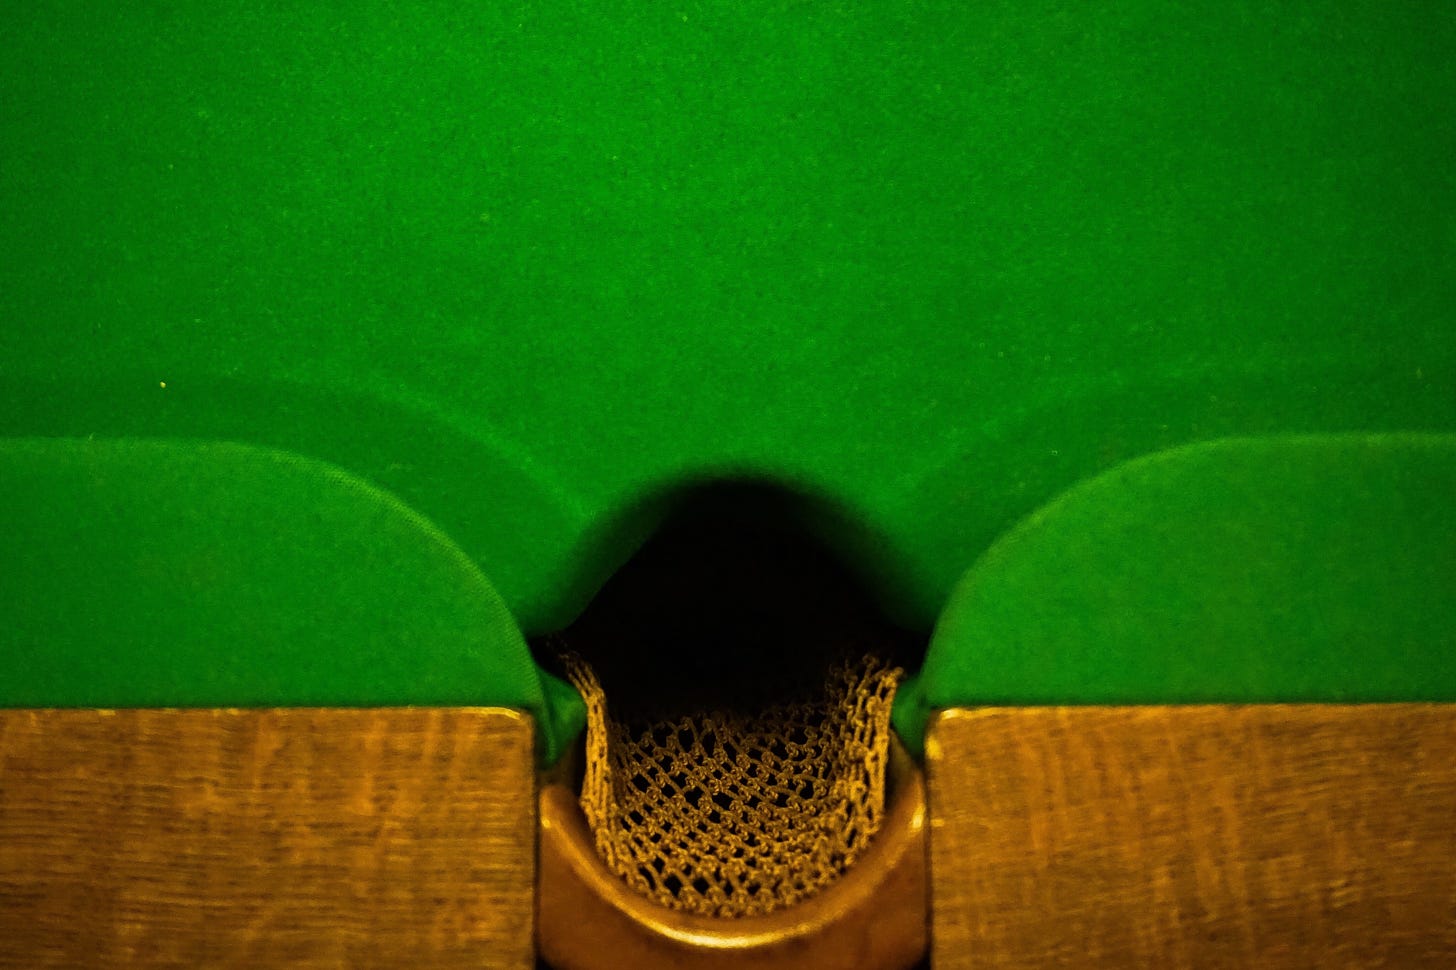 Classic antique style billiards table with knit pocket and Kelly green felt